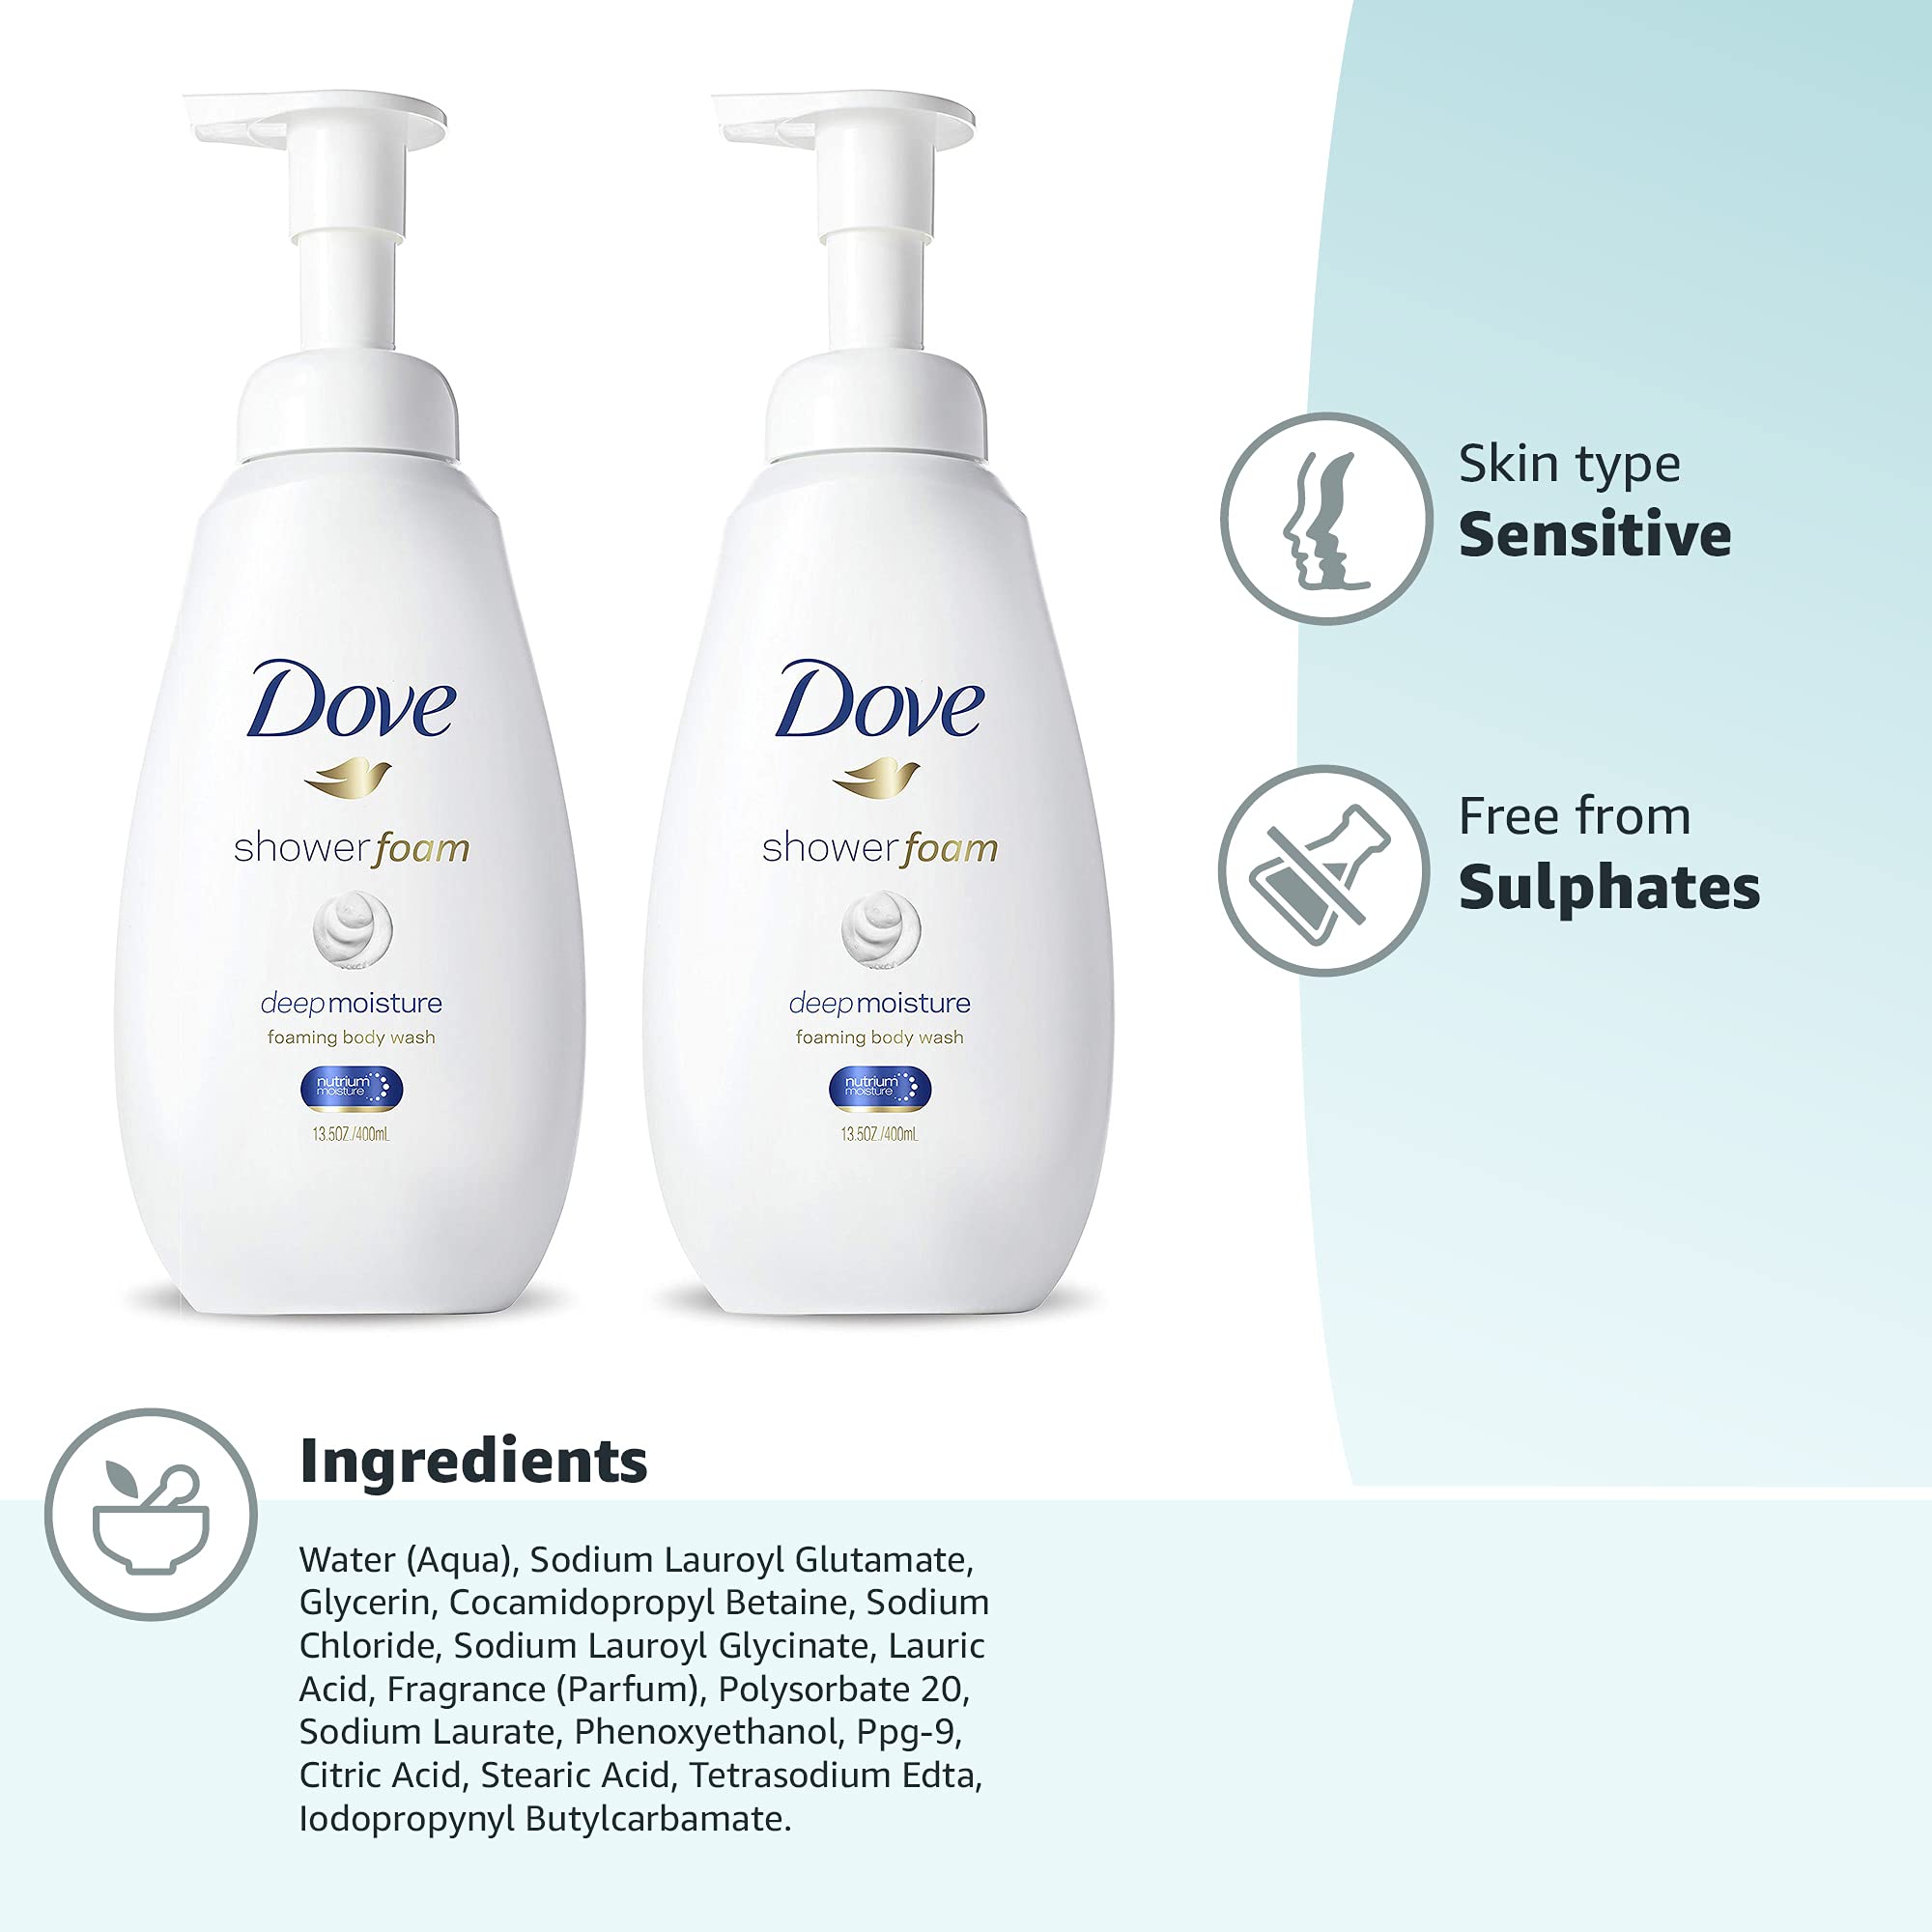 Dove Instant Foaming Body Wash for Soft, Smooth Skin Deep Moisture Cleanser That Effectively Washes Away Bacteria While Nourishing Your Skin,13.5 oz (Pack of 2)